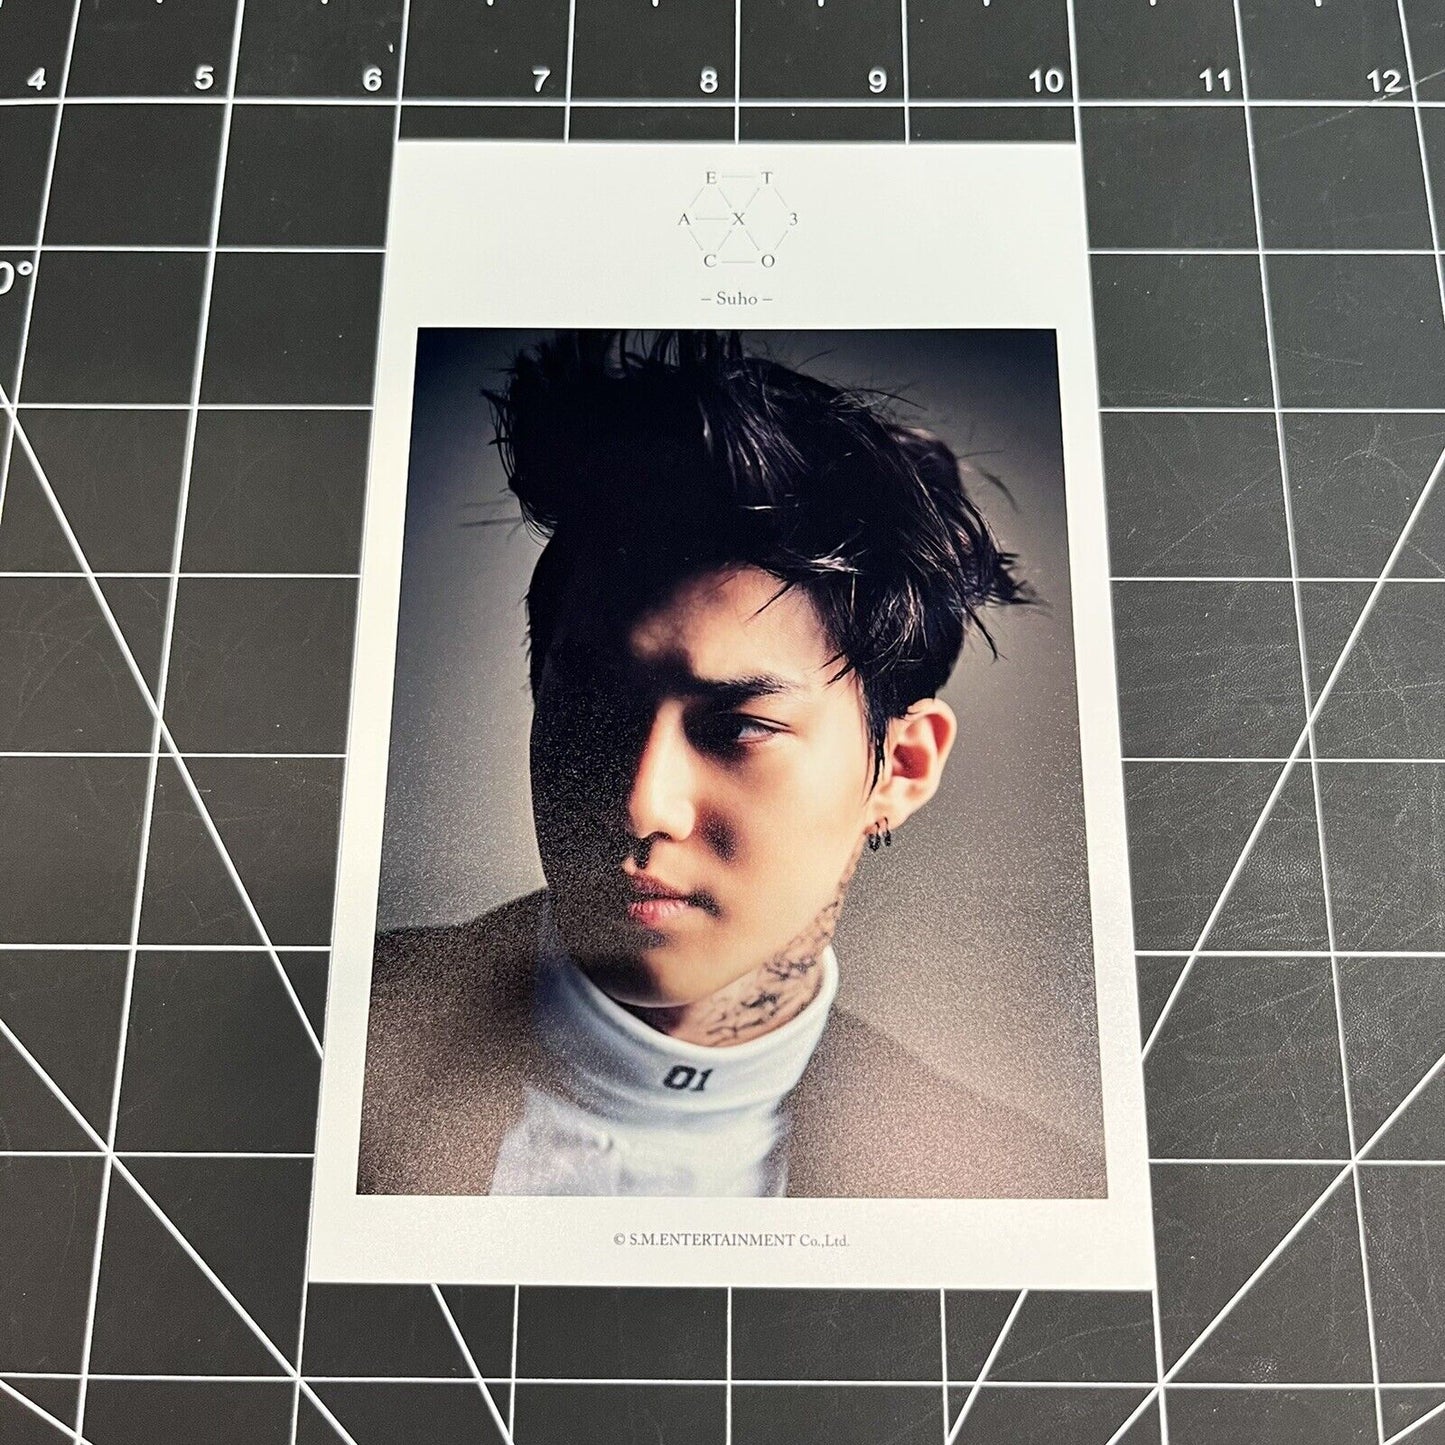 EXO Monster Official Photo (10 x 16cm) Merchandise - Suho